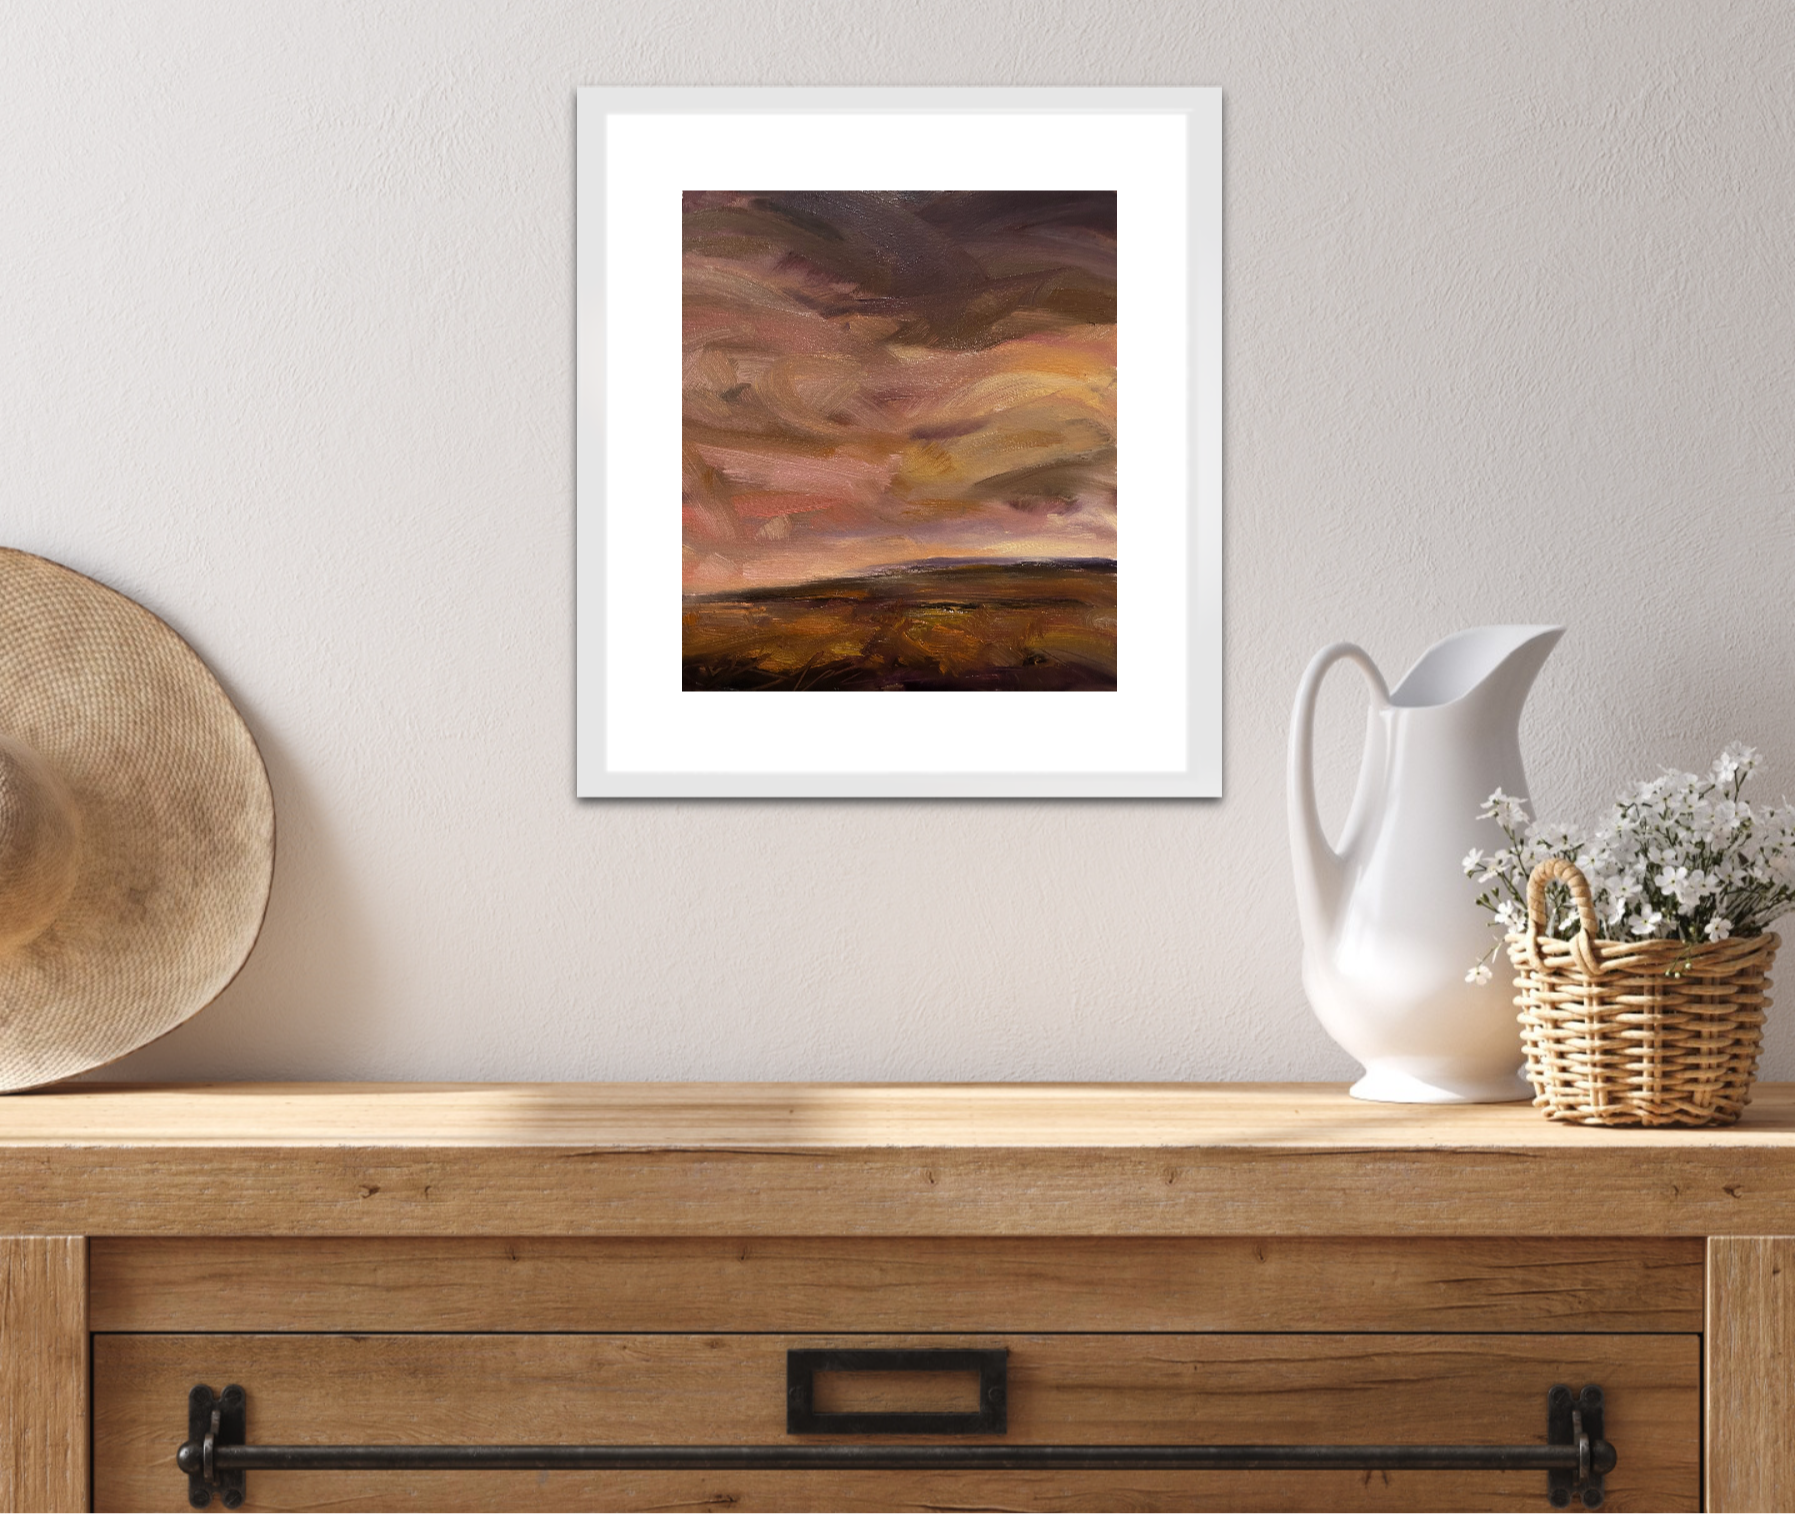 My Soul&#39;s Home Original Oil On Paper Landscape Painting In Room Setting 2